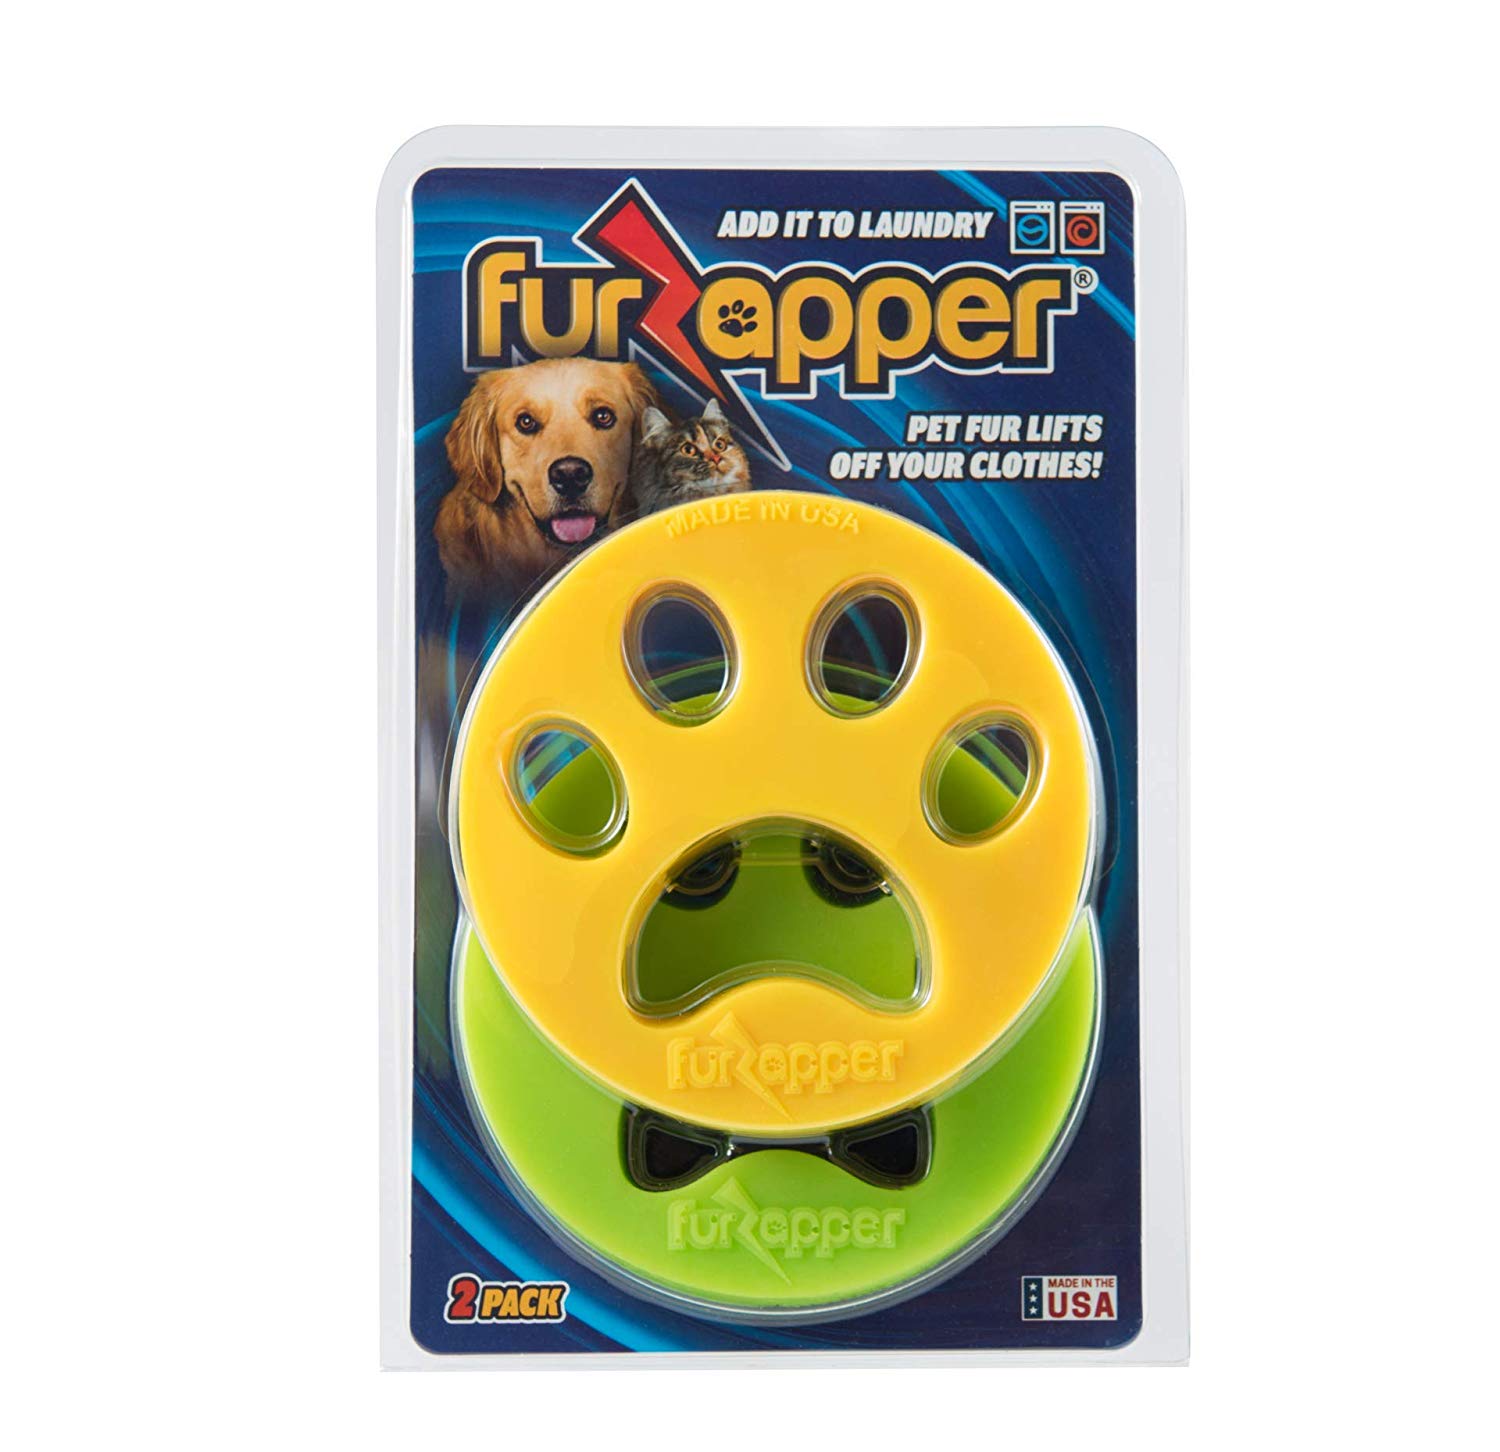 Fur Zapper pet fur remover, green and yellow discs with paw print design.